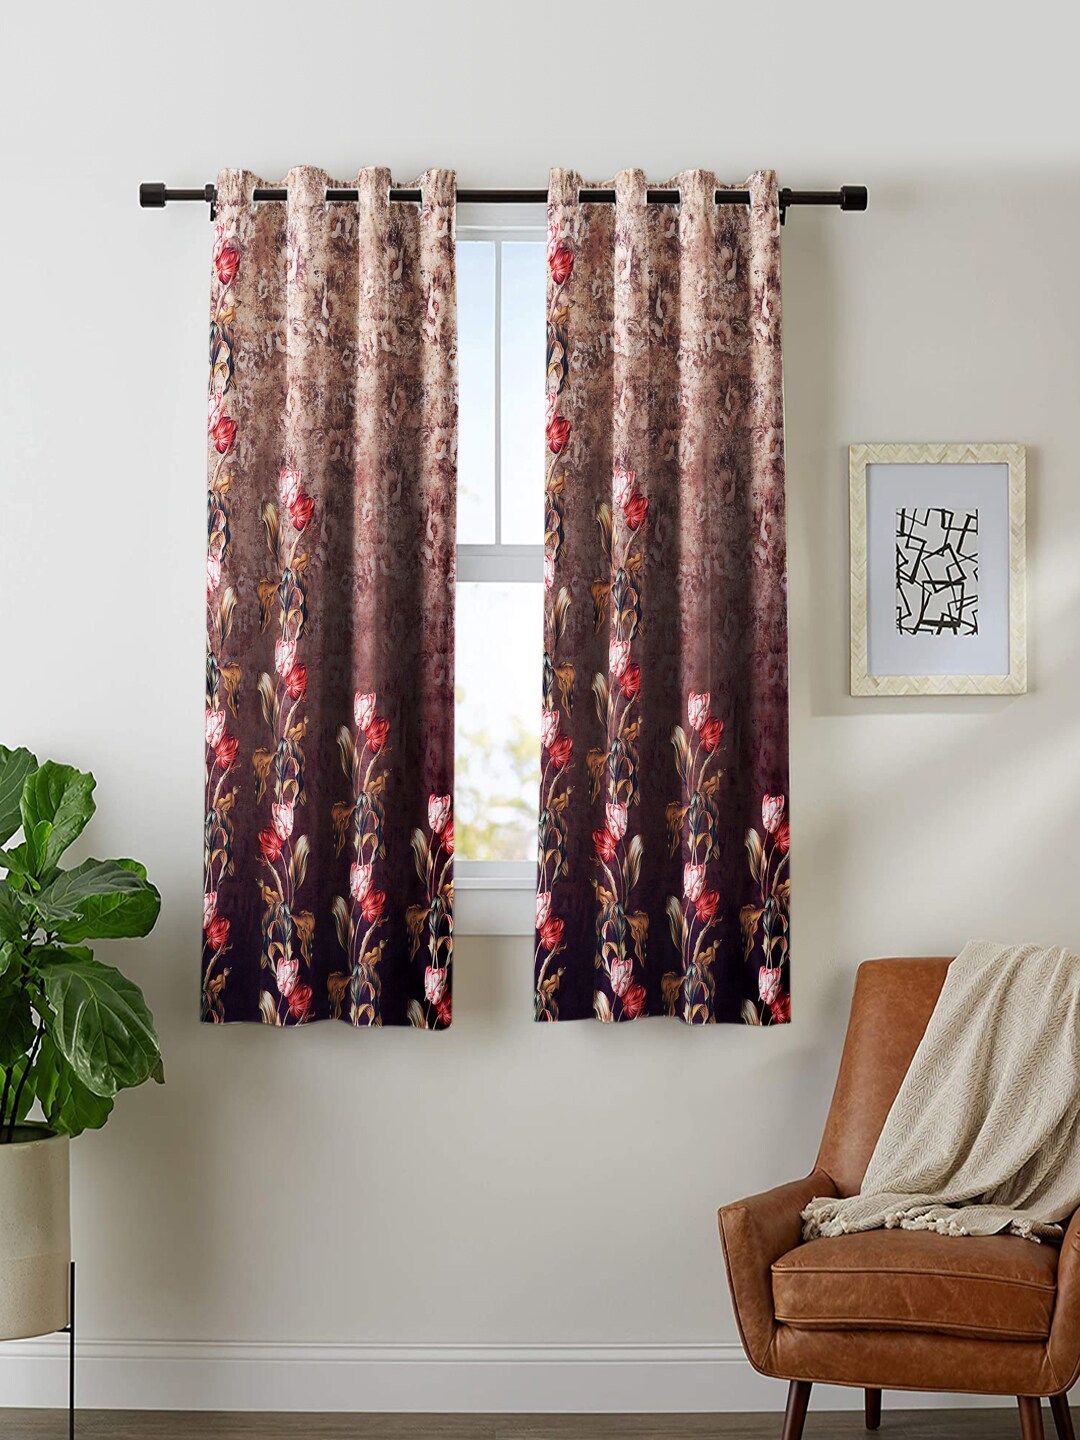 Nendle Set of 2 Floral Room Darkening Window Curtain Price in India